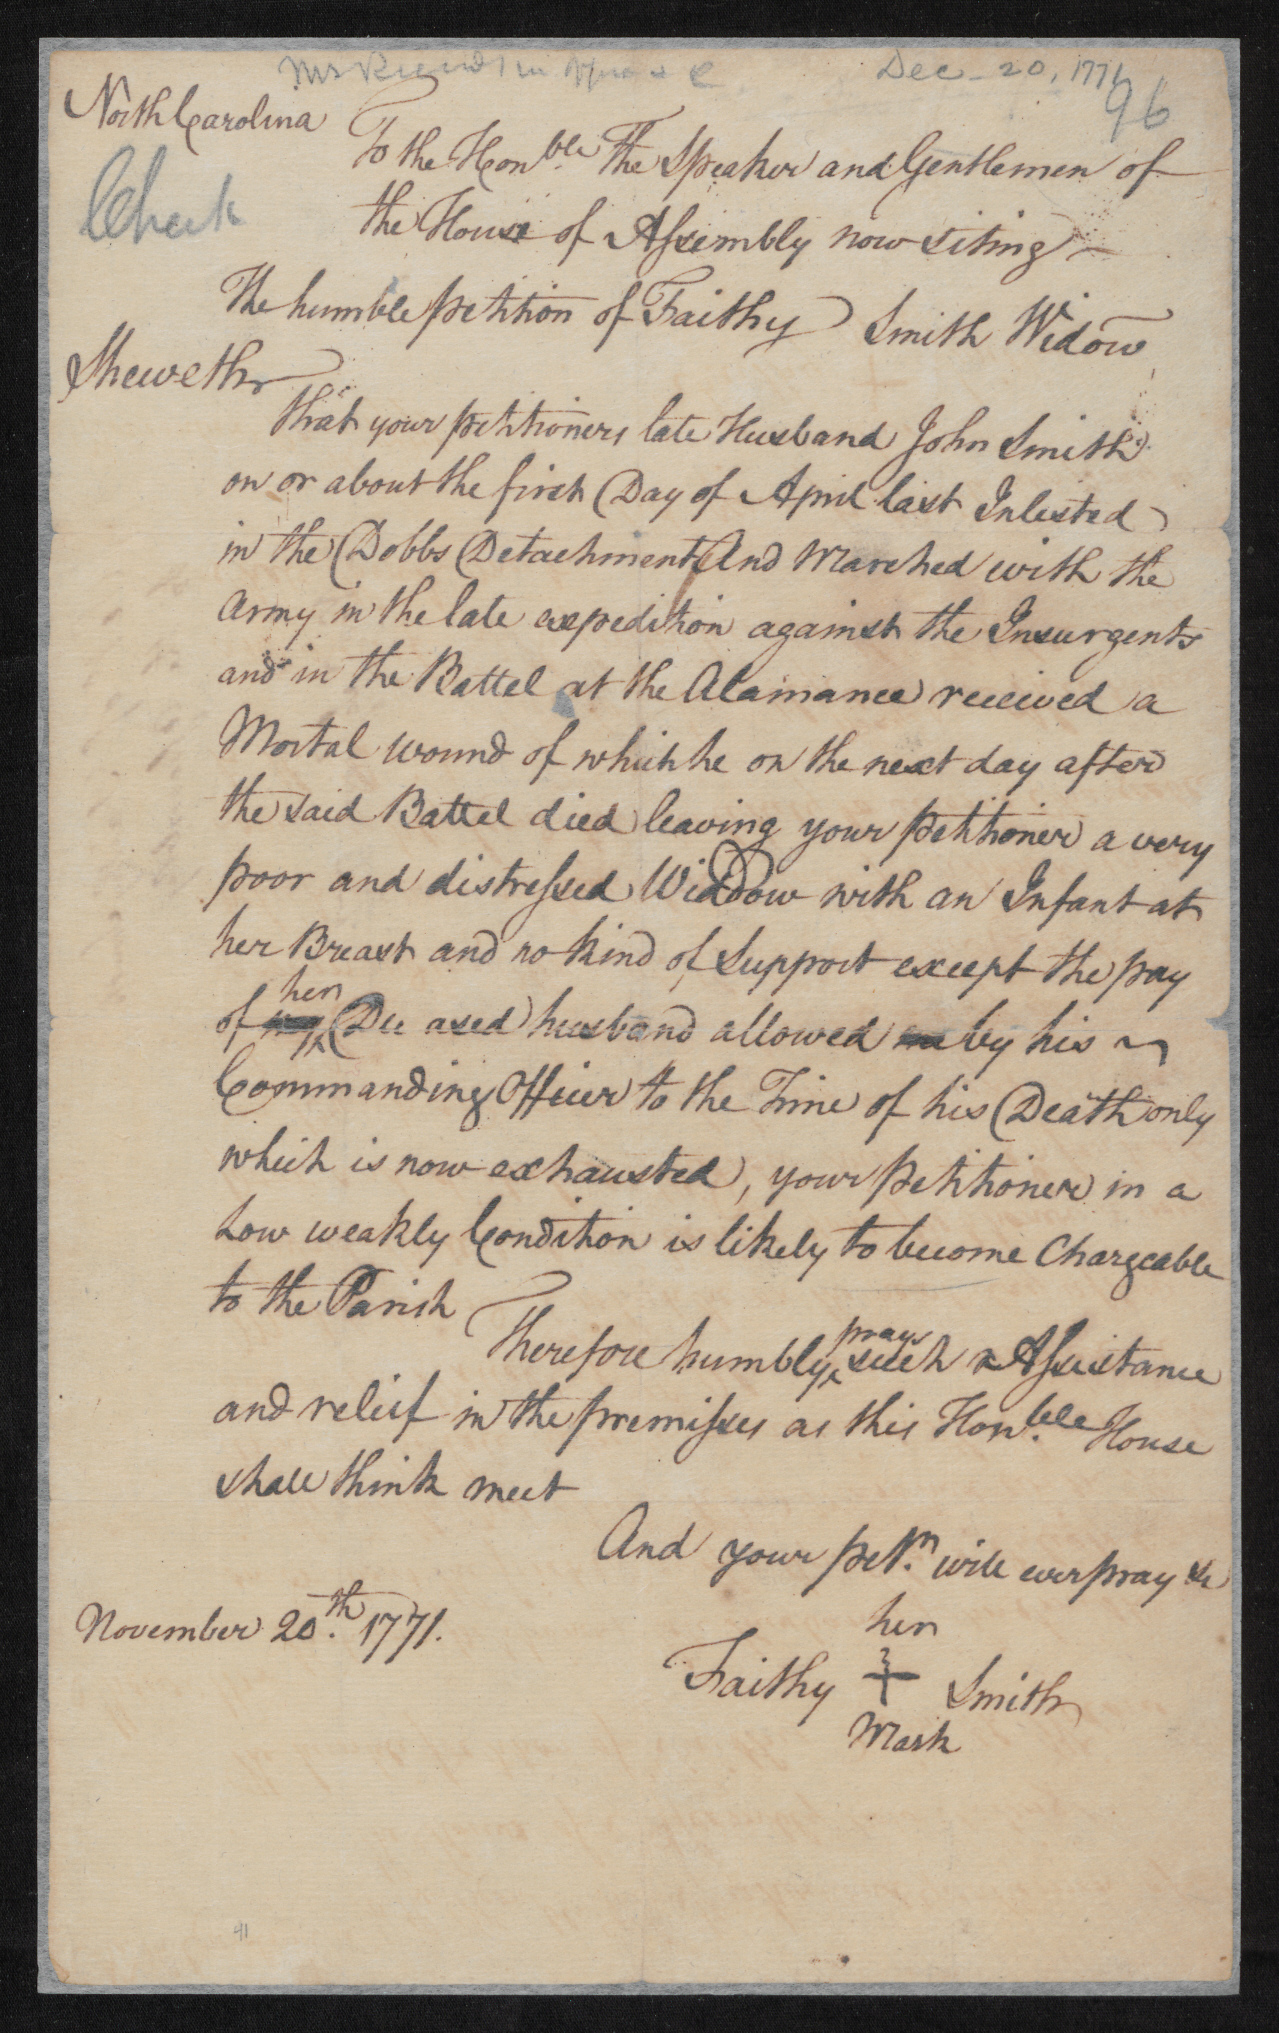 Petition from Faithy Smith to the North Carolina Colonial Assembly for a Pension, 20 November 1771, page 1.